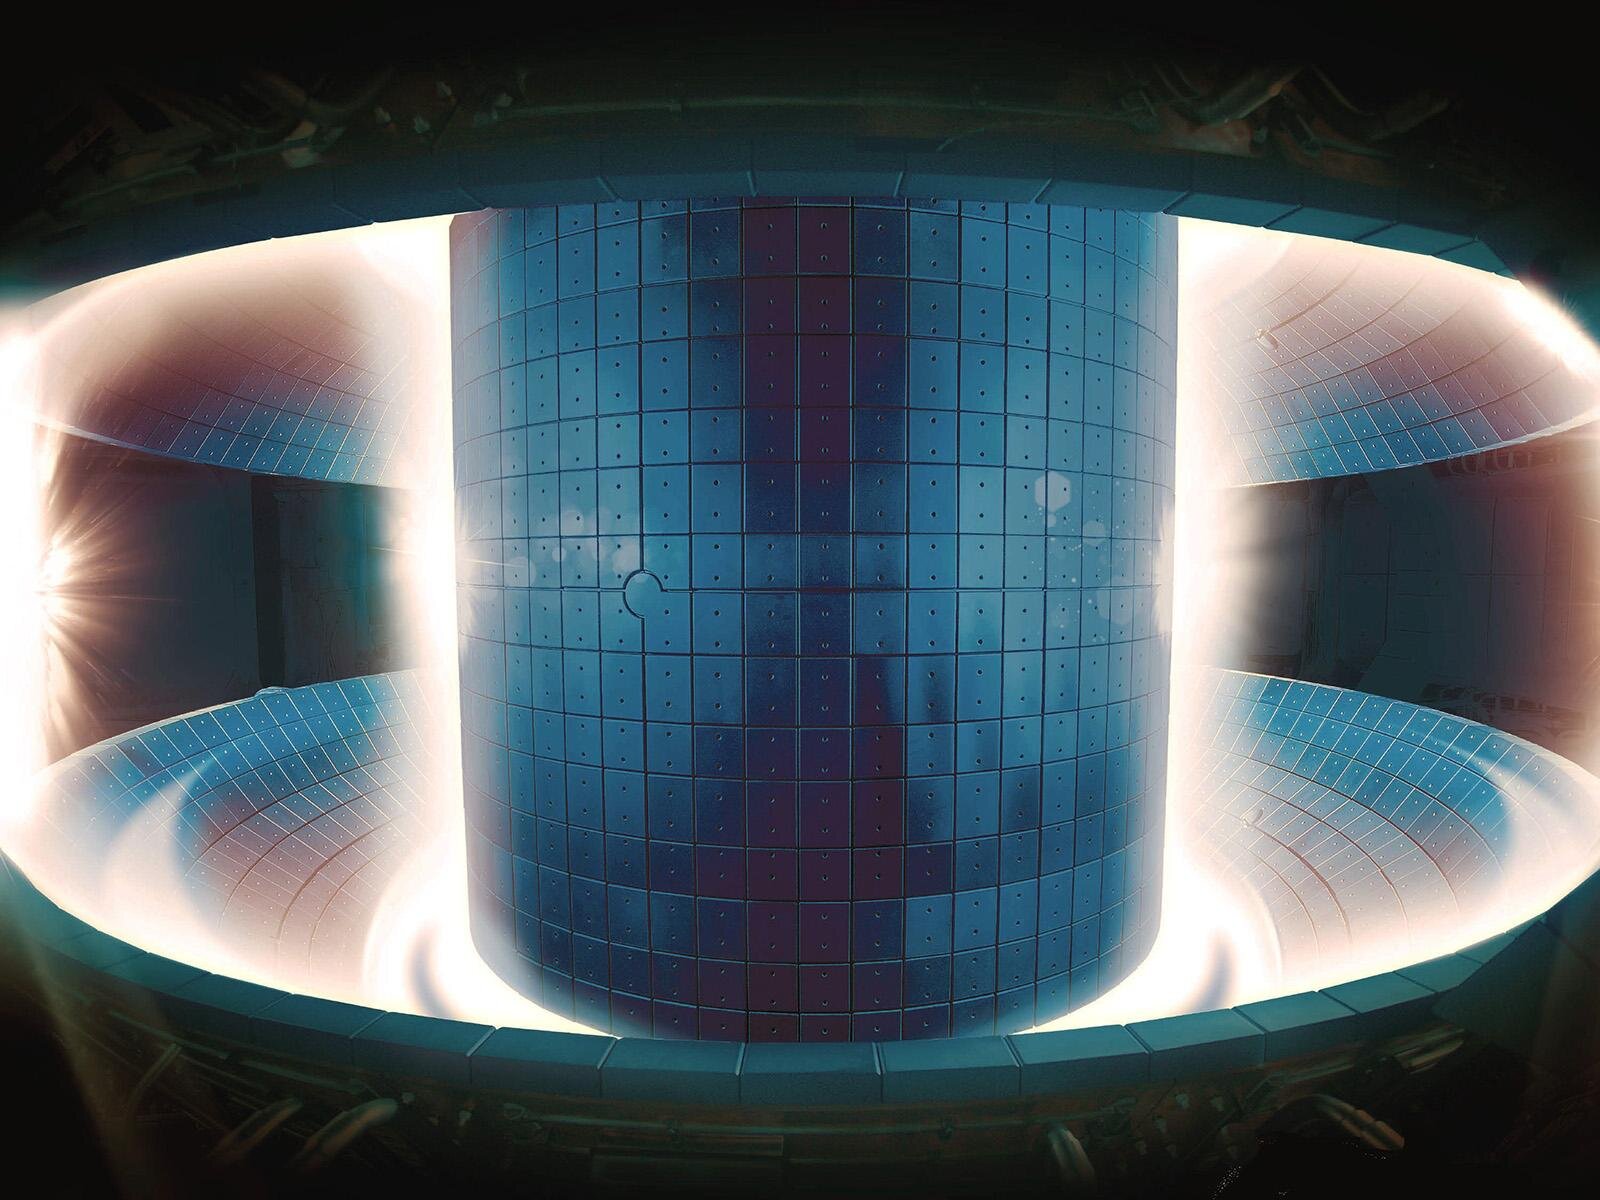 Researchers report on metal alloys that could support nuclear fusion energy